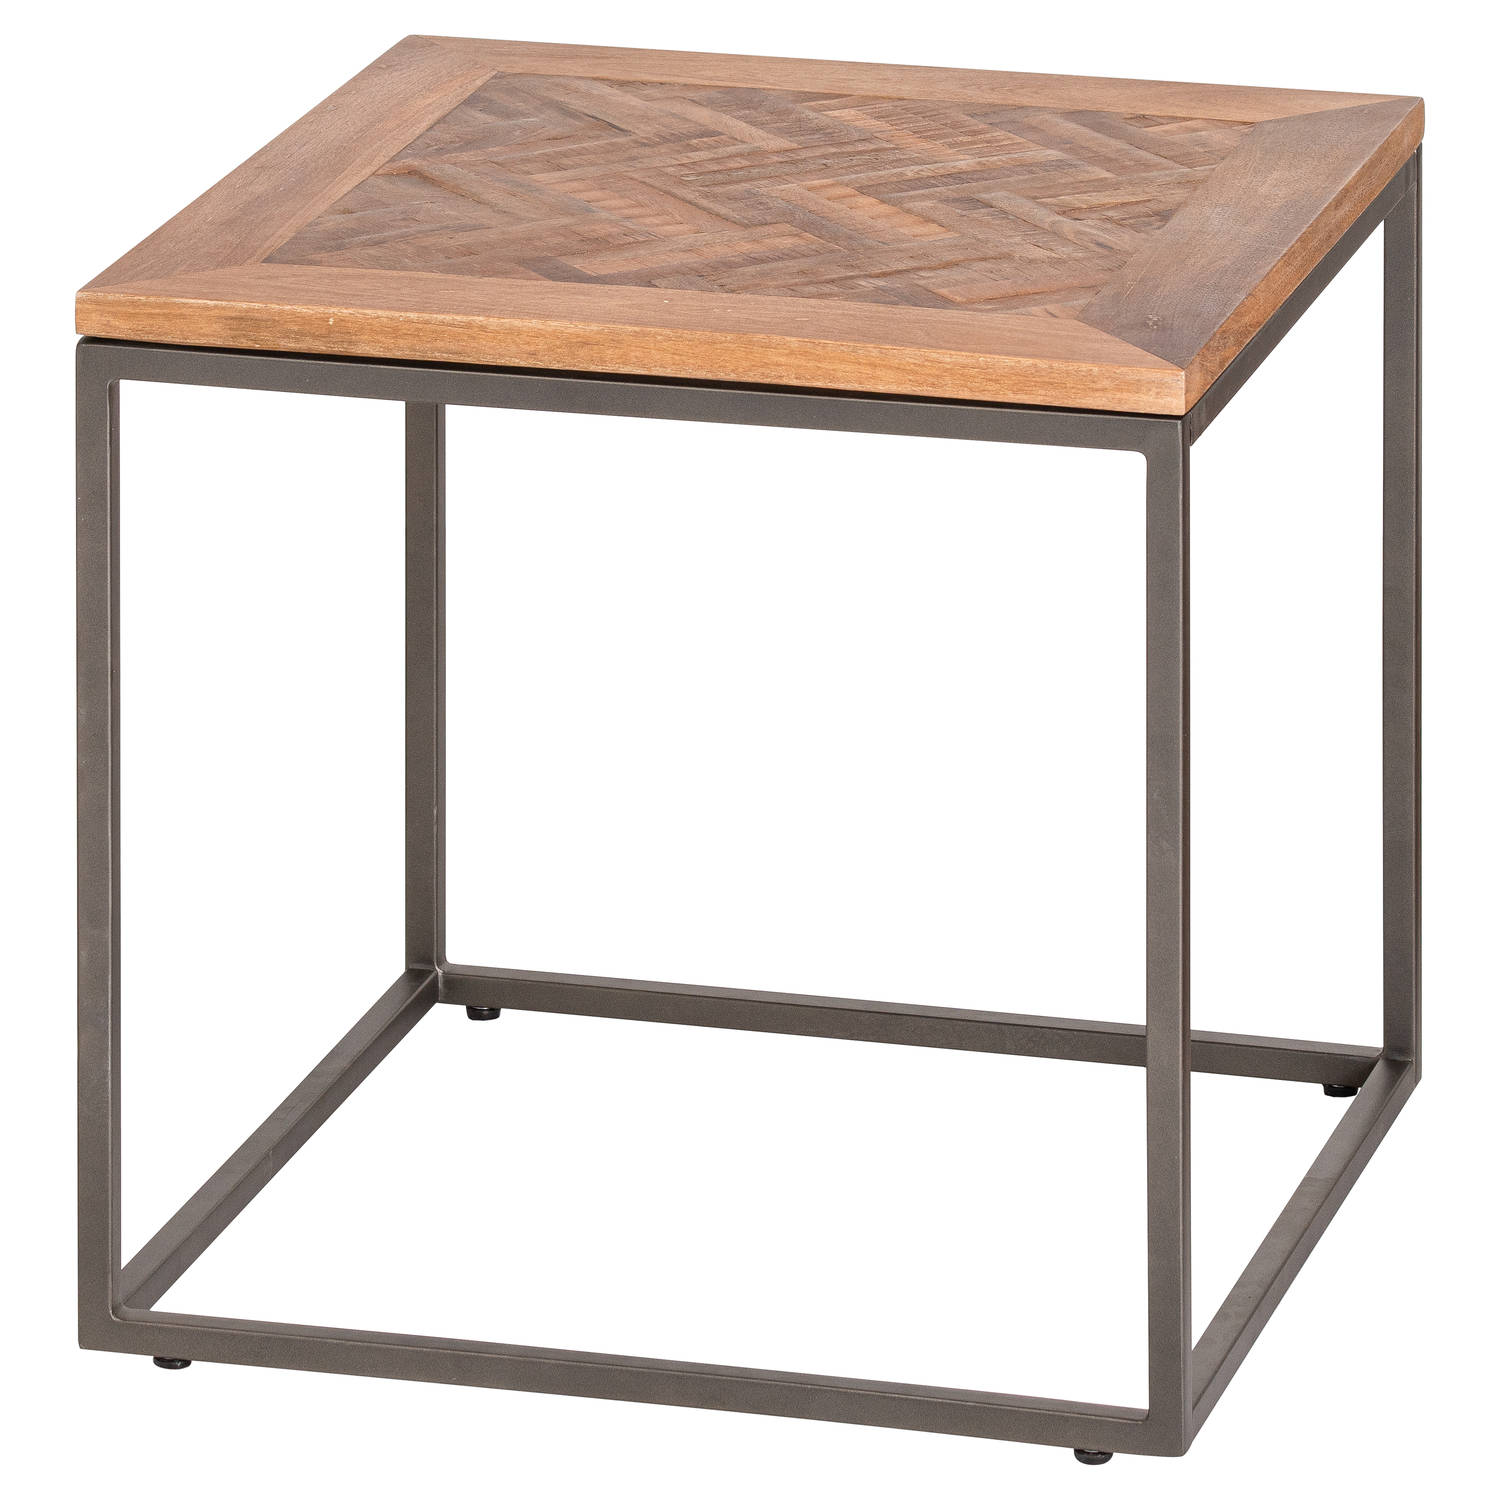 Hoxton Collection Side Table With Parquet Top - Image 1